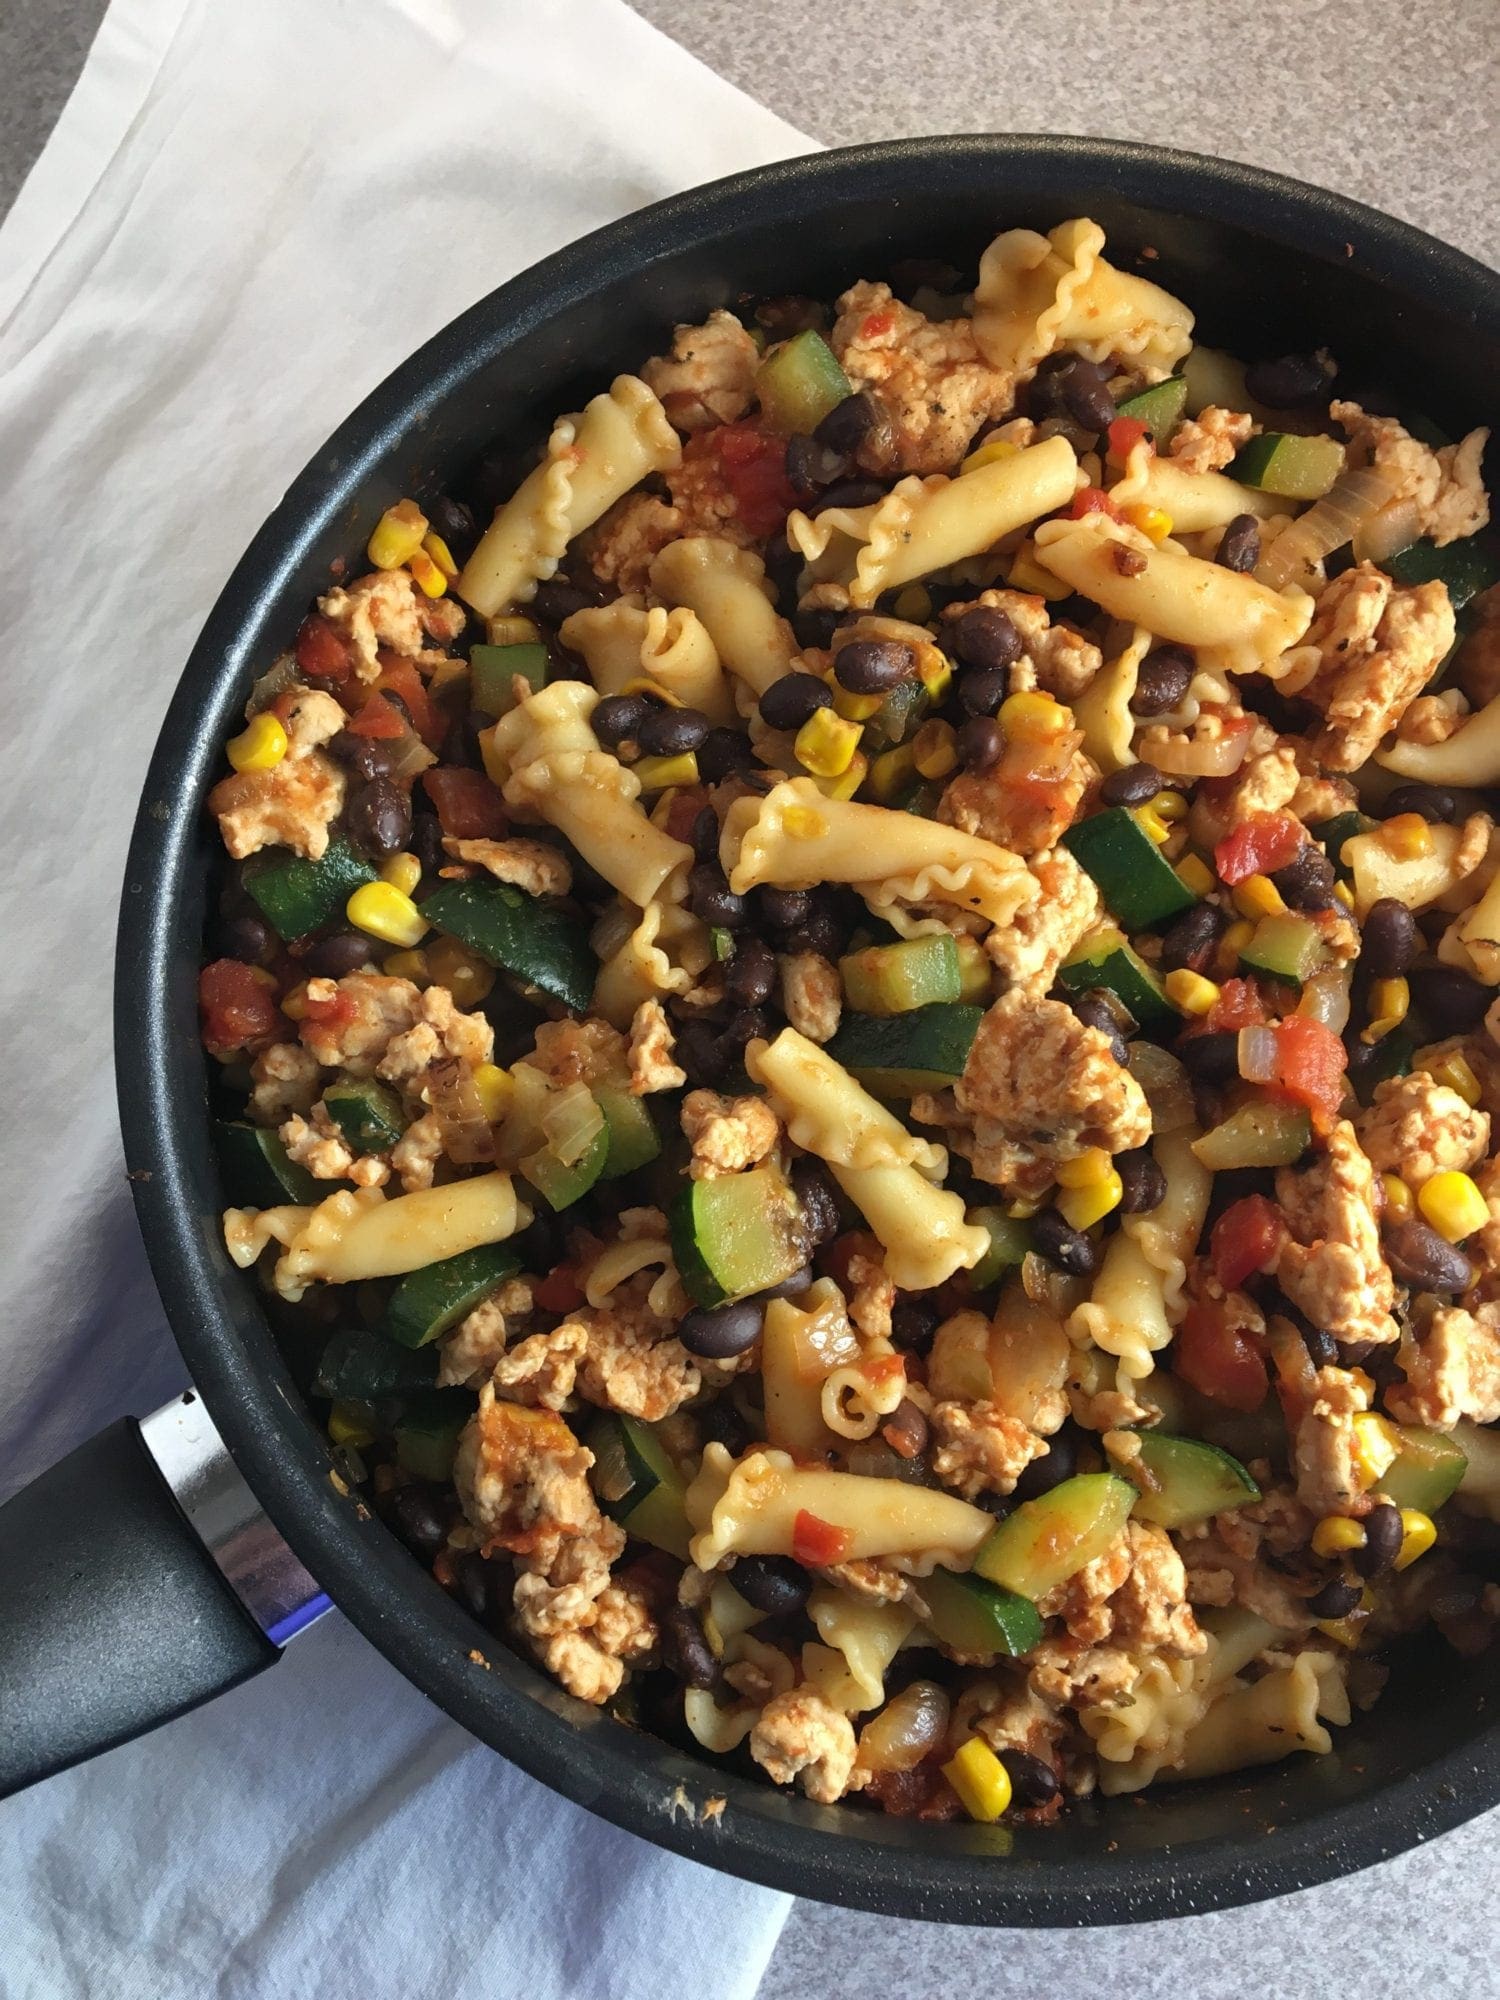 Southwestern Turkey and Vegetable Pasta Dish on Meal Planning Mommies - Just 1 WW SP per serving